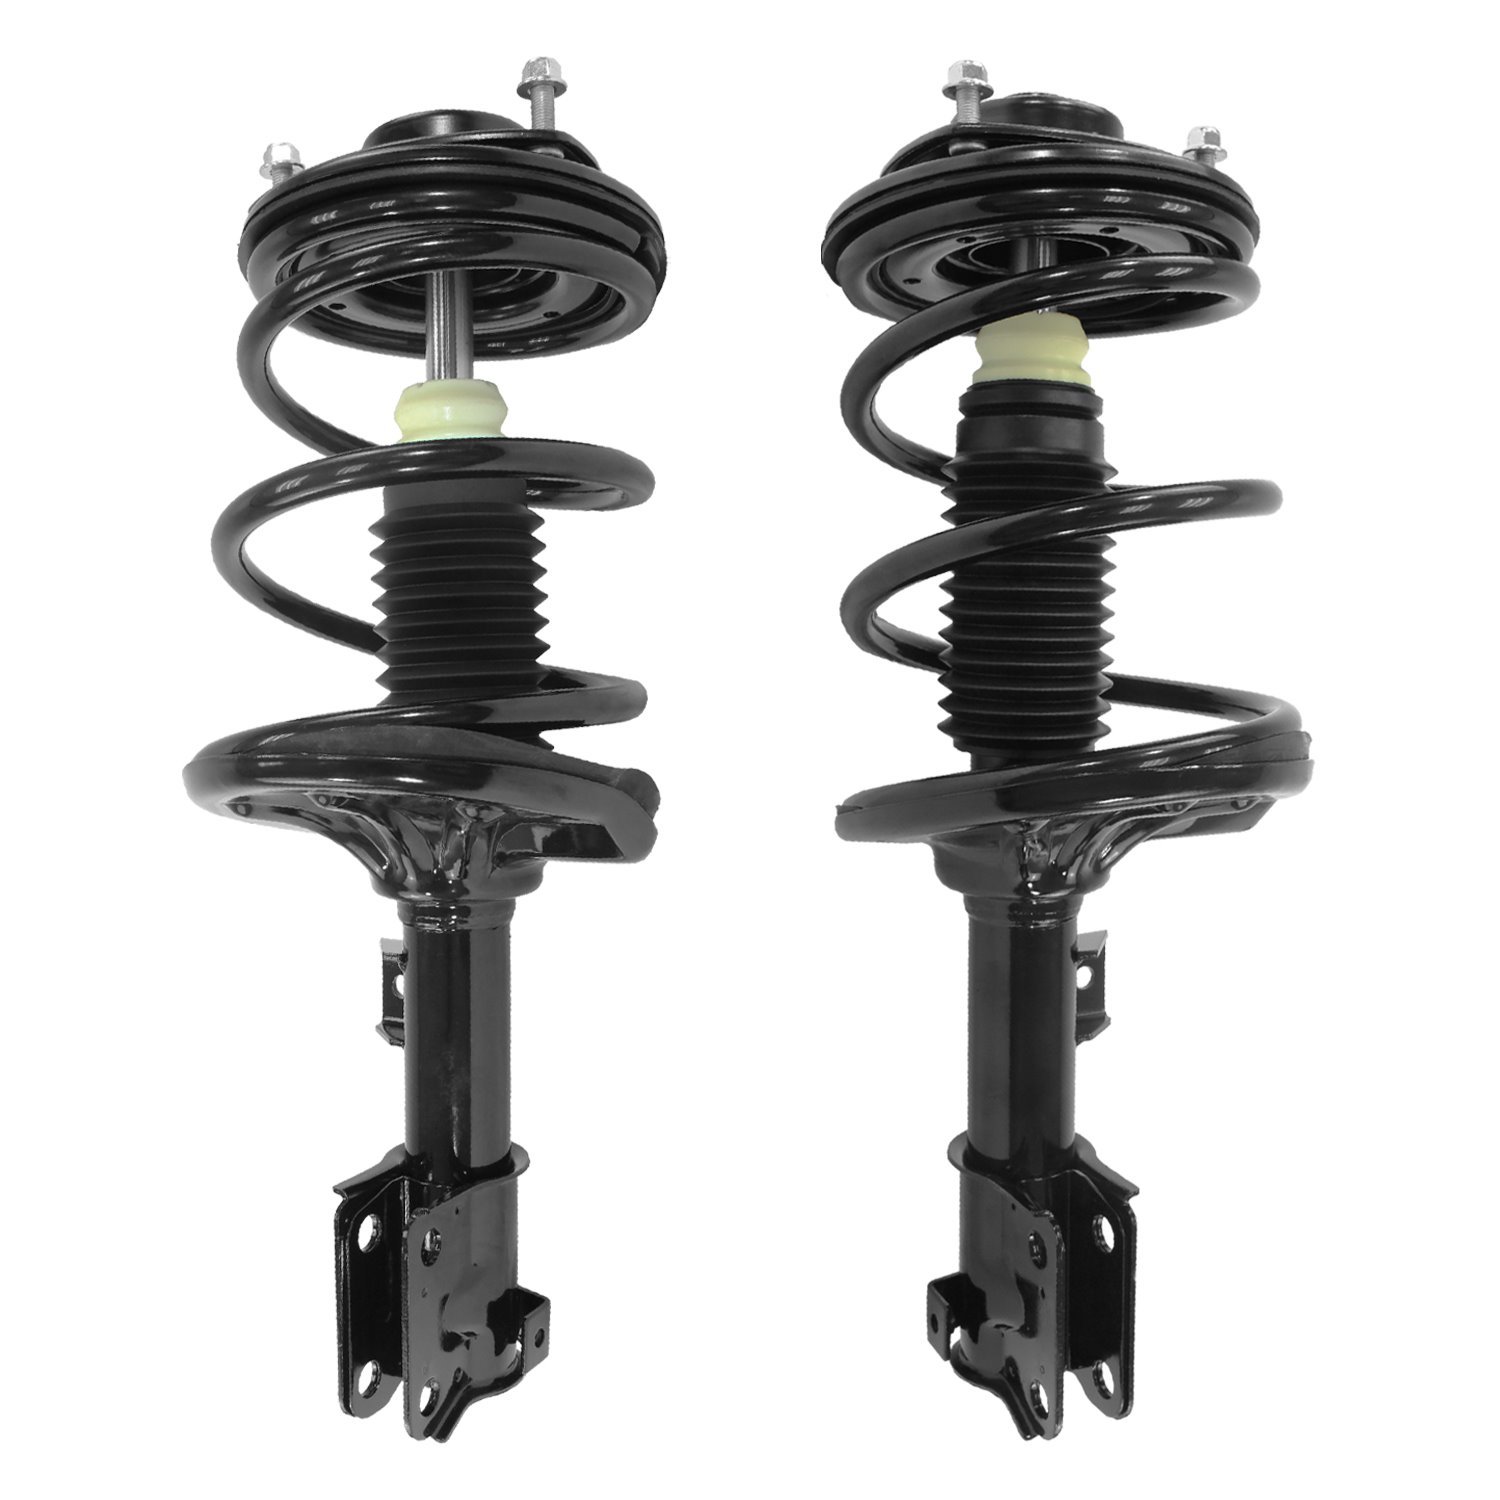 2-13701-13702-001 Front Suspension Strut & Coil Spring Assemby Set Fits Select Mitsubishi Eclipse